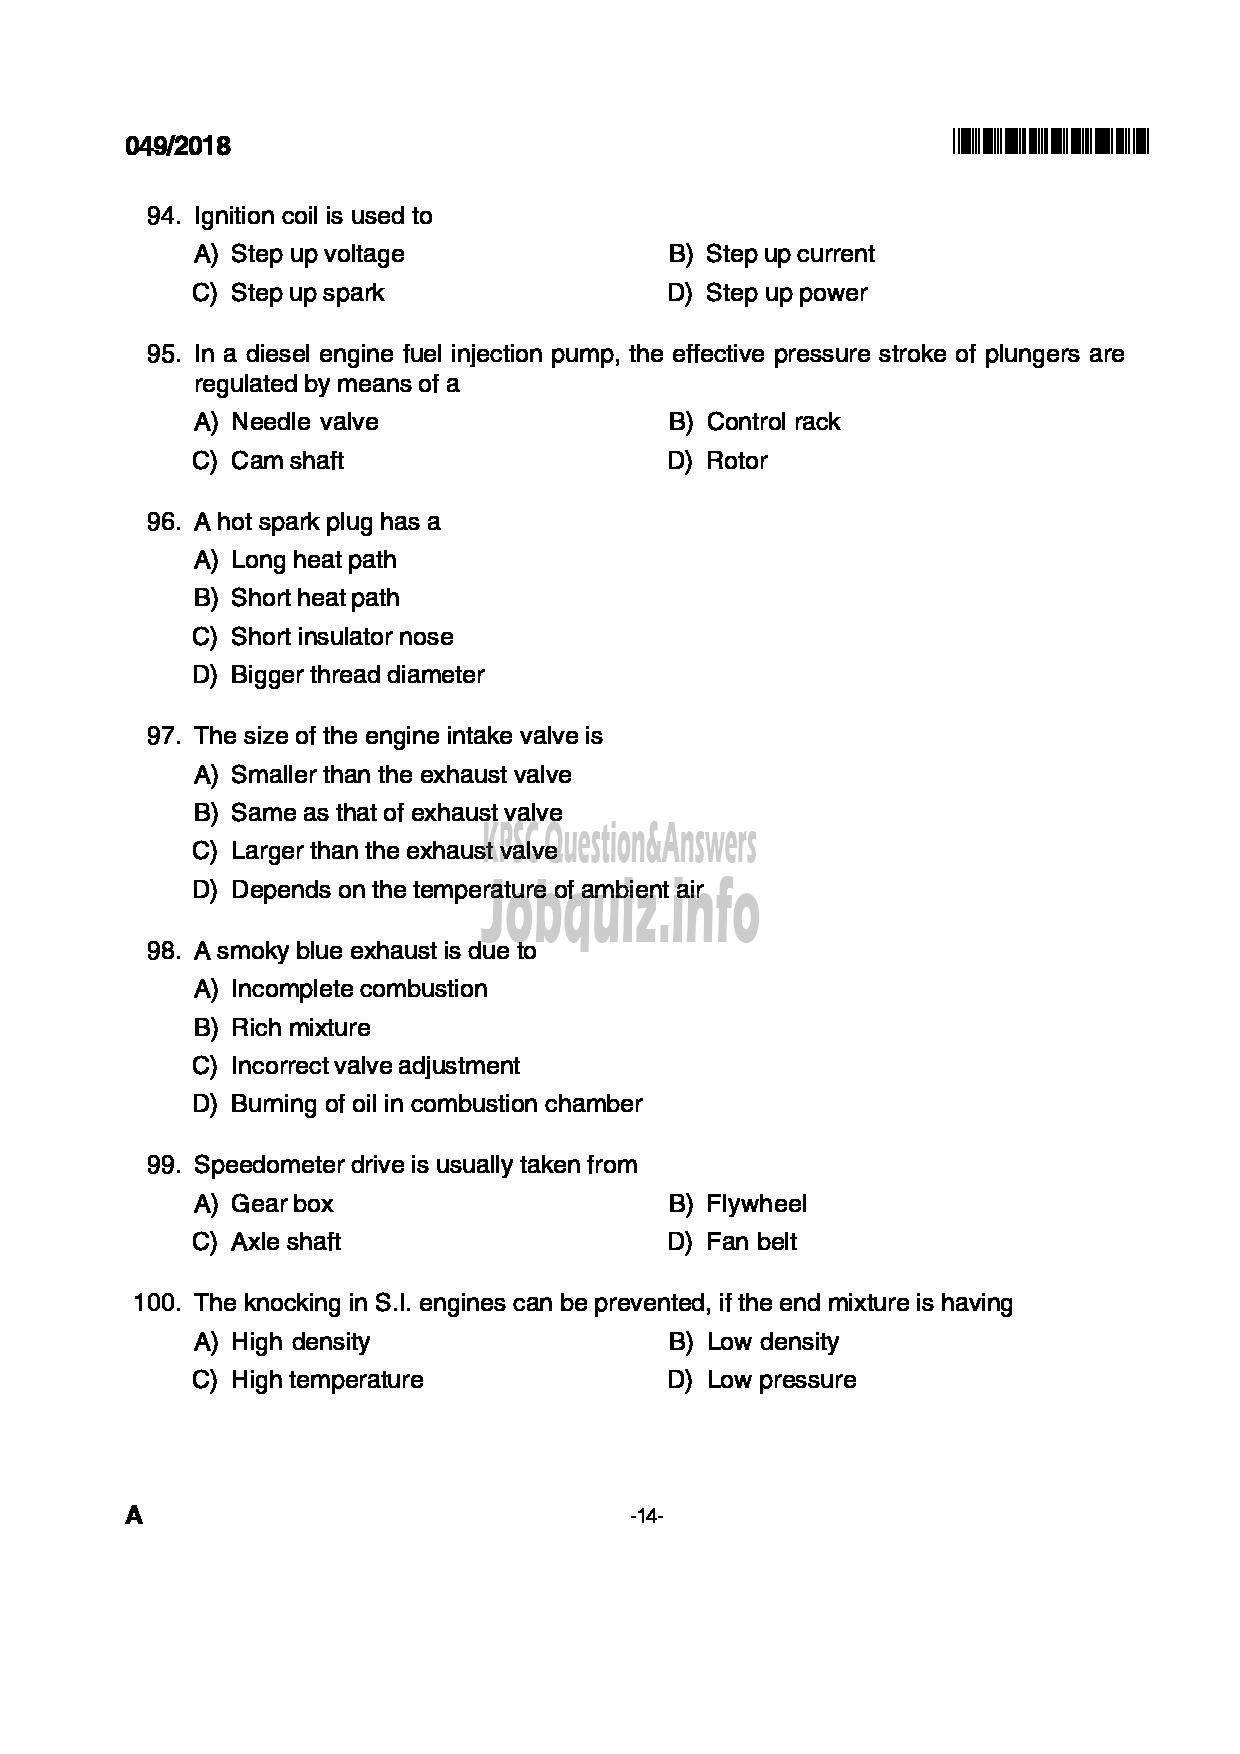 Kerala PSC Question Paper - VOCATIONAL INSTRUCTOR IN MAINTENANCE AND REPAIRS OF AUTOMOBILES VOCATIONAL HIGHER SECONDARY EDUCATION-14